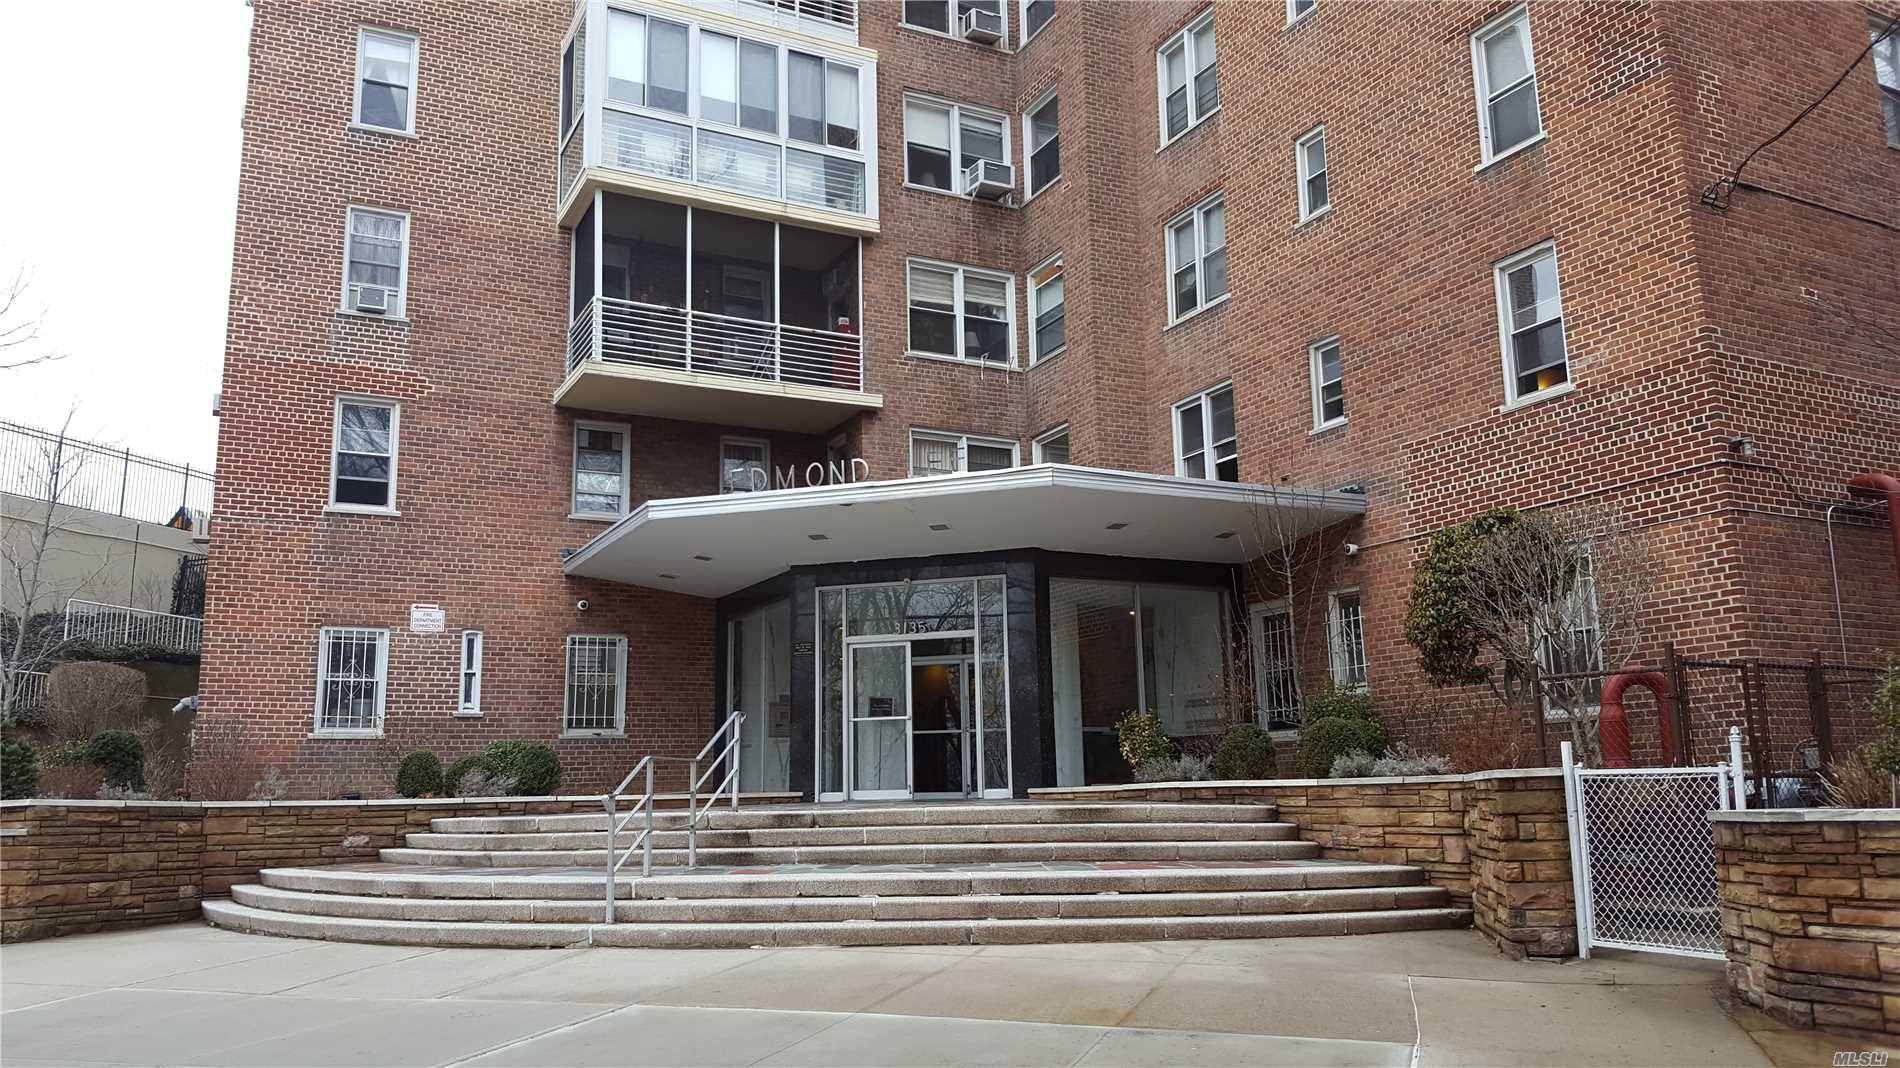 Co Op In Spuyten Duyvil, Bronx With 24 Hours Doorman, Free Swimming Pool, Balcony With View Of Ewen Park, Laundry Room, Gym Fee Walking Distance To Subway 1, Buses Bx ...